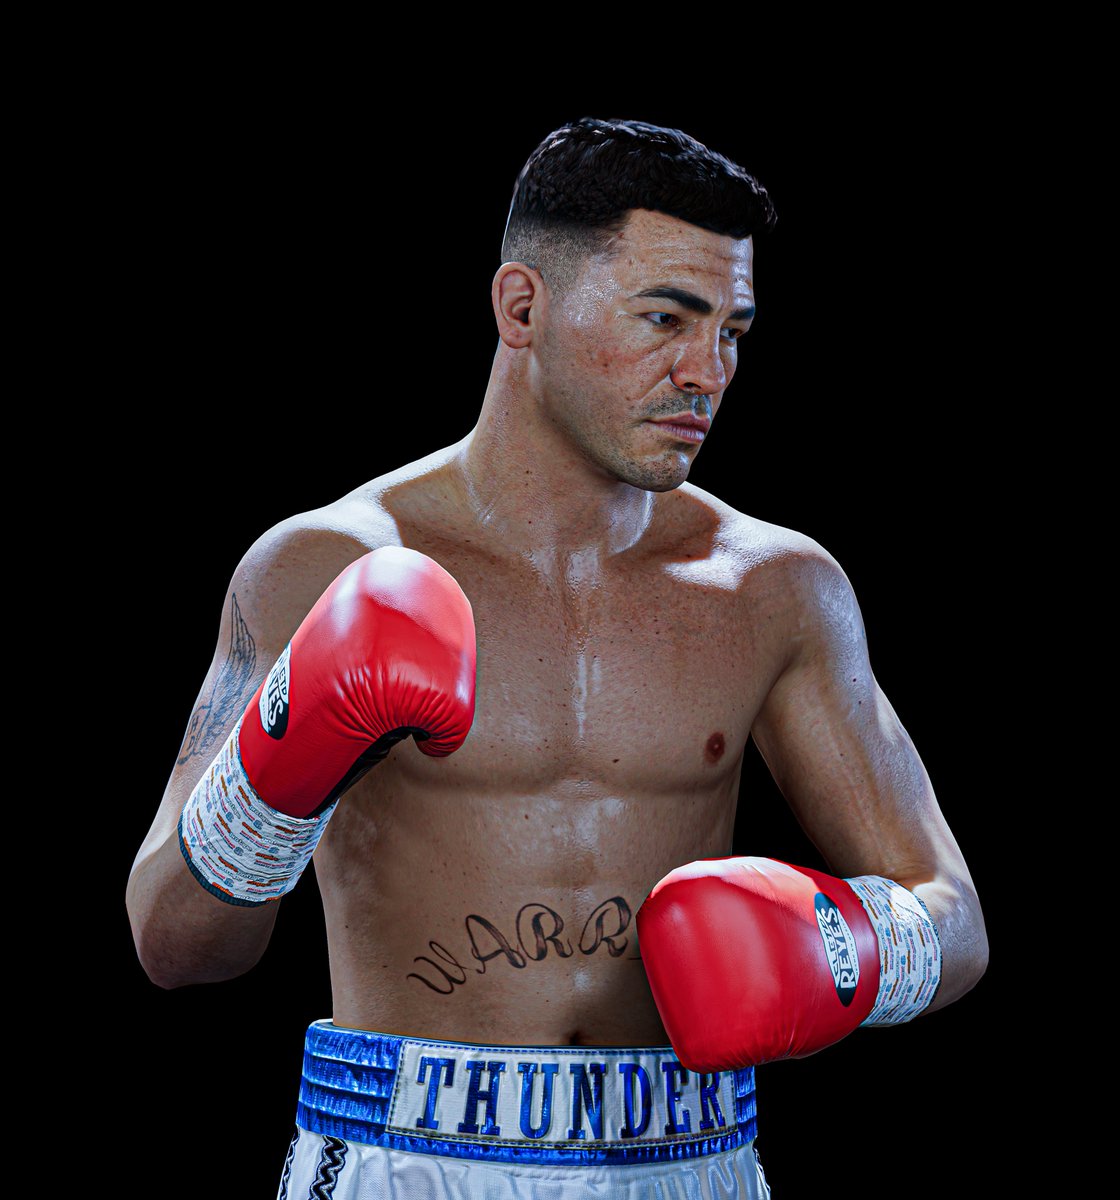 Arturo 'Thunder' Gatti, one-half of one of the greatest boxing trilogies of all time, joins the Undisputed day 1 early access roster. Check out these renders of the Blood and Guts Warrior in Undisputed! #BecomeUndisputed 🥊